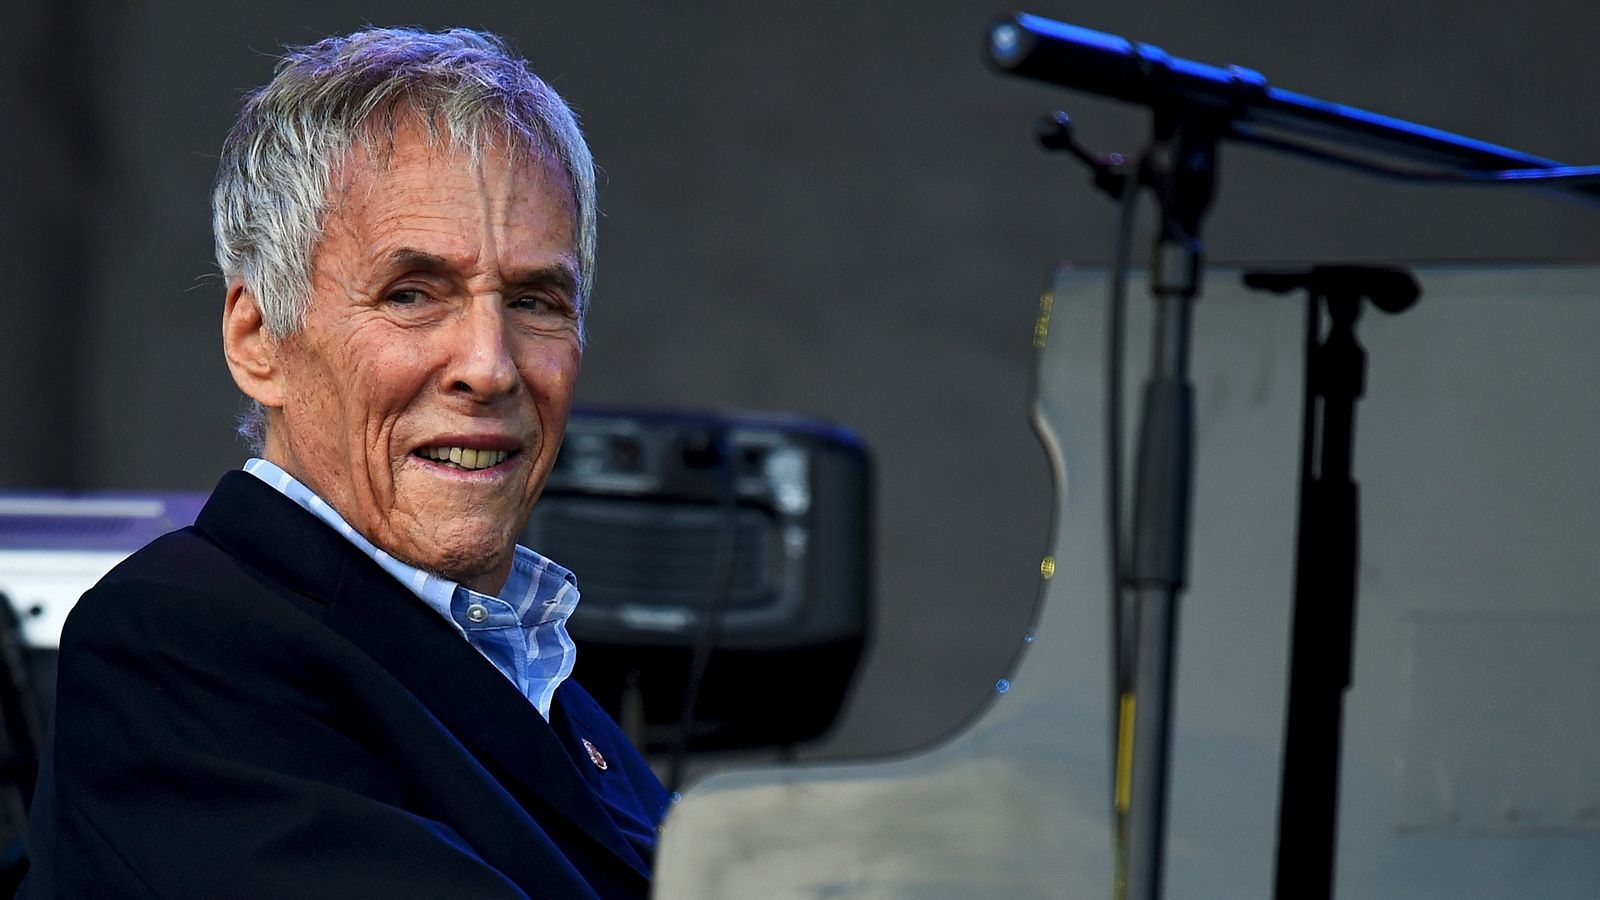 Burt Bacharach dies aged 94: Composer was behind hits including I Say A Little Prayer and Raindrops Keep Falling On My Head